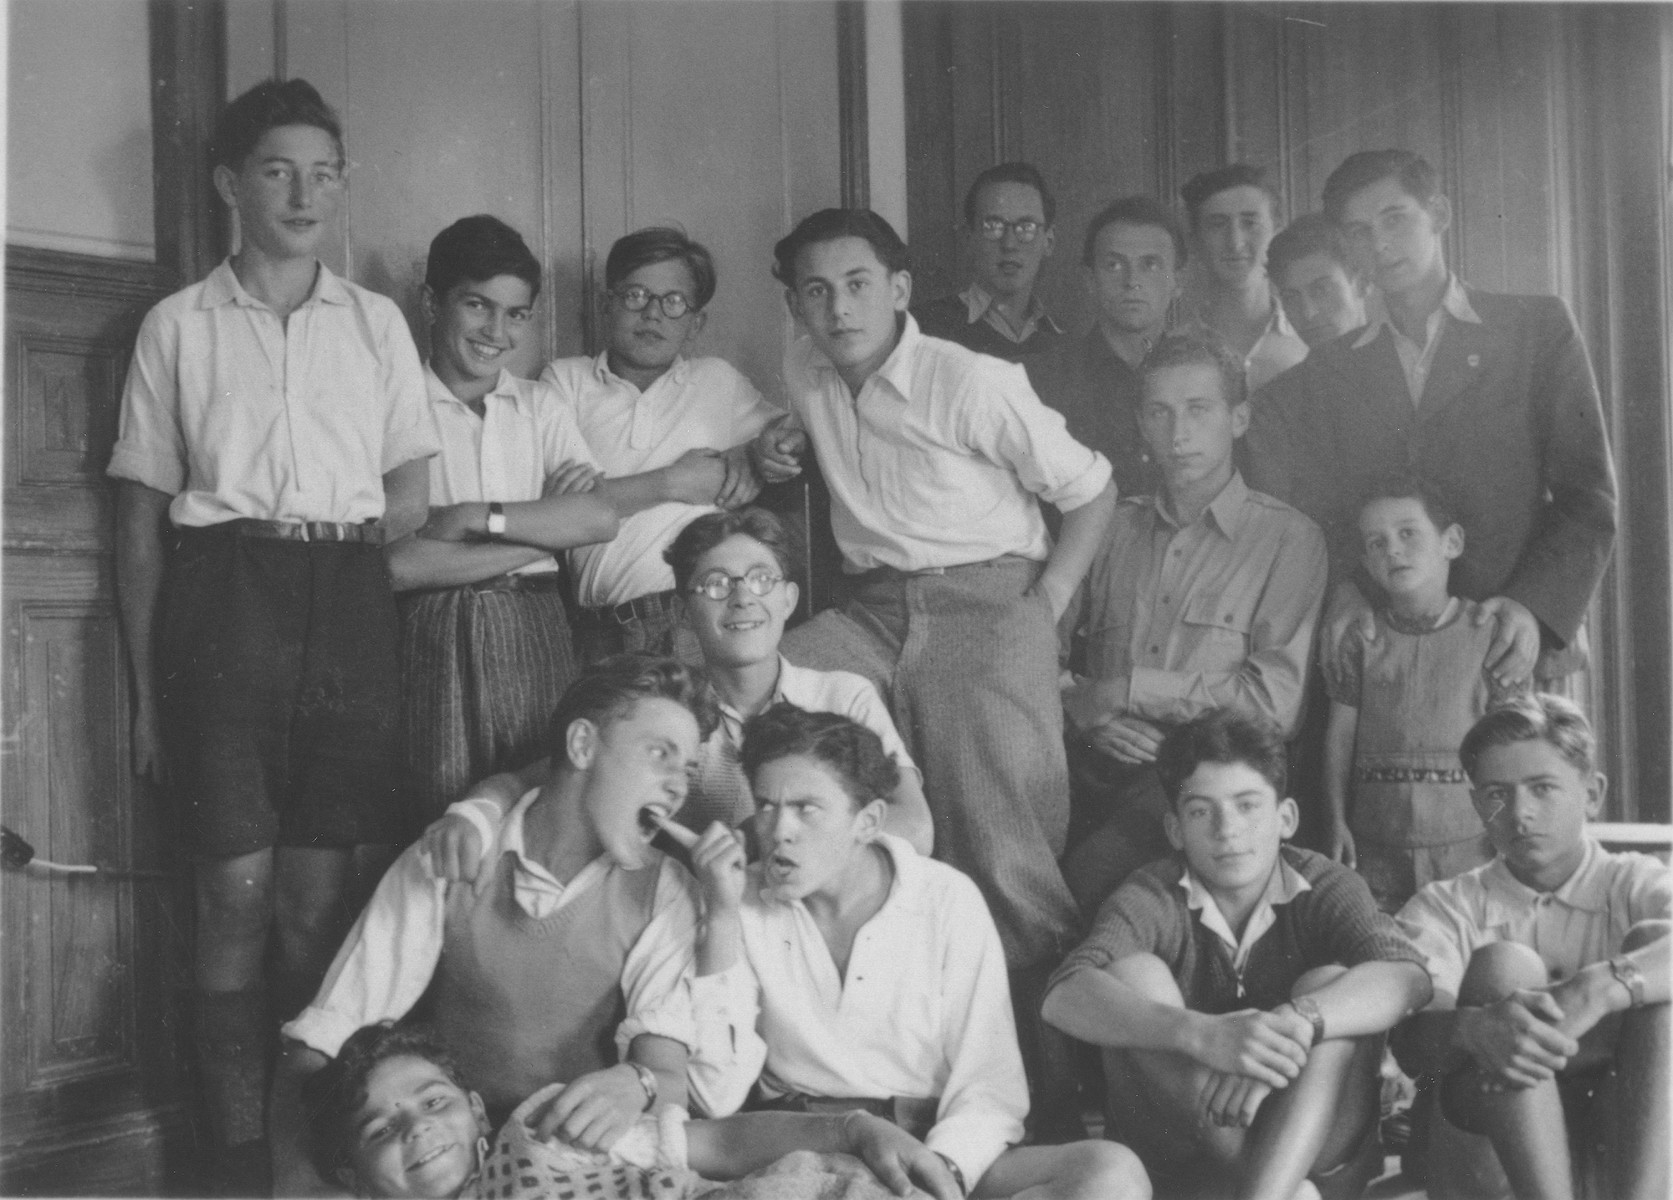 Group portrait of Jewish refugee boys in the Hôme de la Forêt, a children's home run by the OSE (Oeuvre de Secours aux Enfants) in Geneva, Switzerland.

Among those pictured are Victor Grasztok (in the center with glasses), Paul Kornowski (front row, far left, biting the finger of his friend), Gilles Segal (front row, second from left), Norbert Bikales (front row, far right?), Gert Silver (back row, far left), and Henri Samuel Kornowski (back row,) and Rudolph (back row, second from the left).  The boy standing with glasses is Bibi. Lying in the very front is Isidor Menache,"Bouboul."